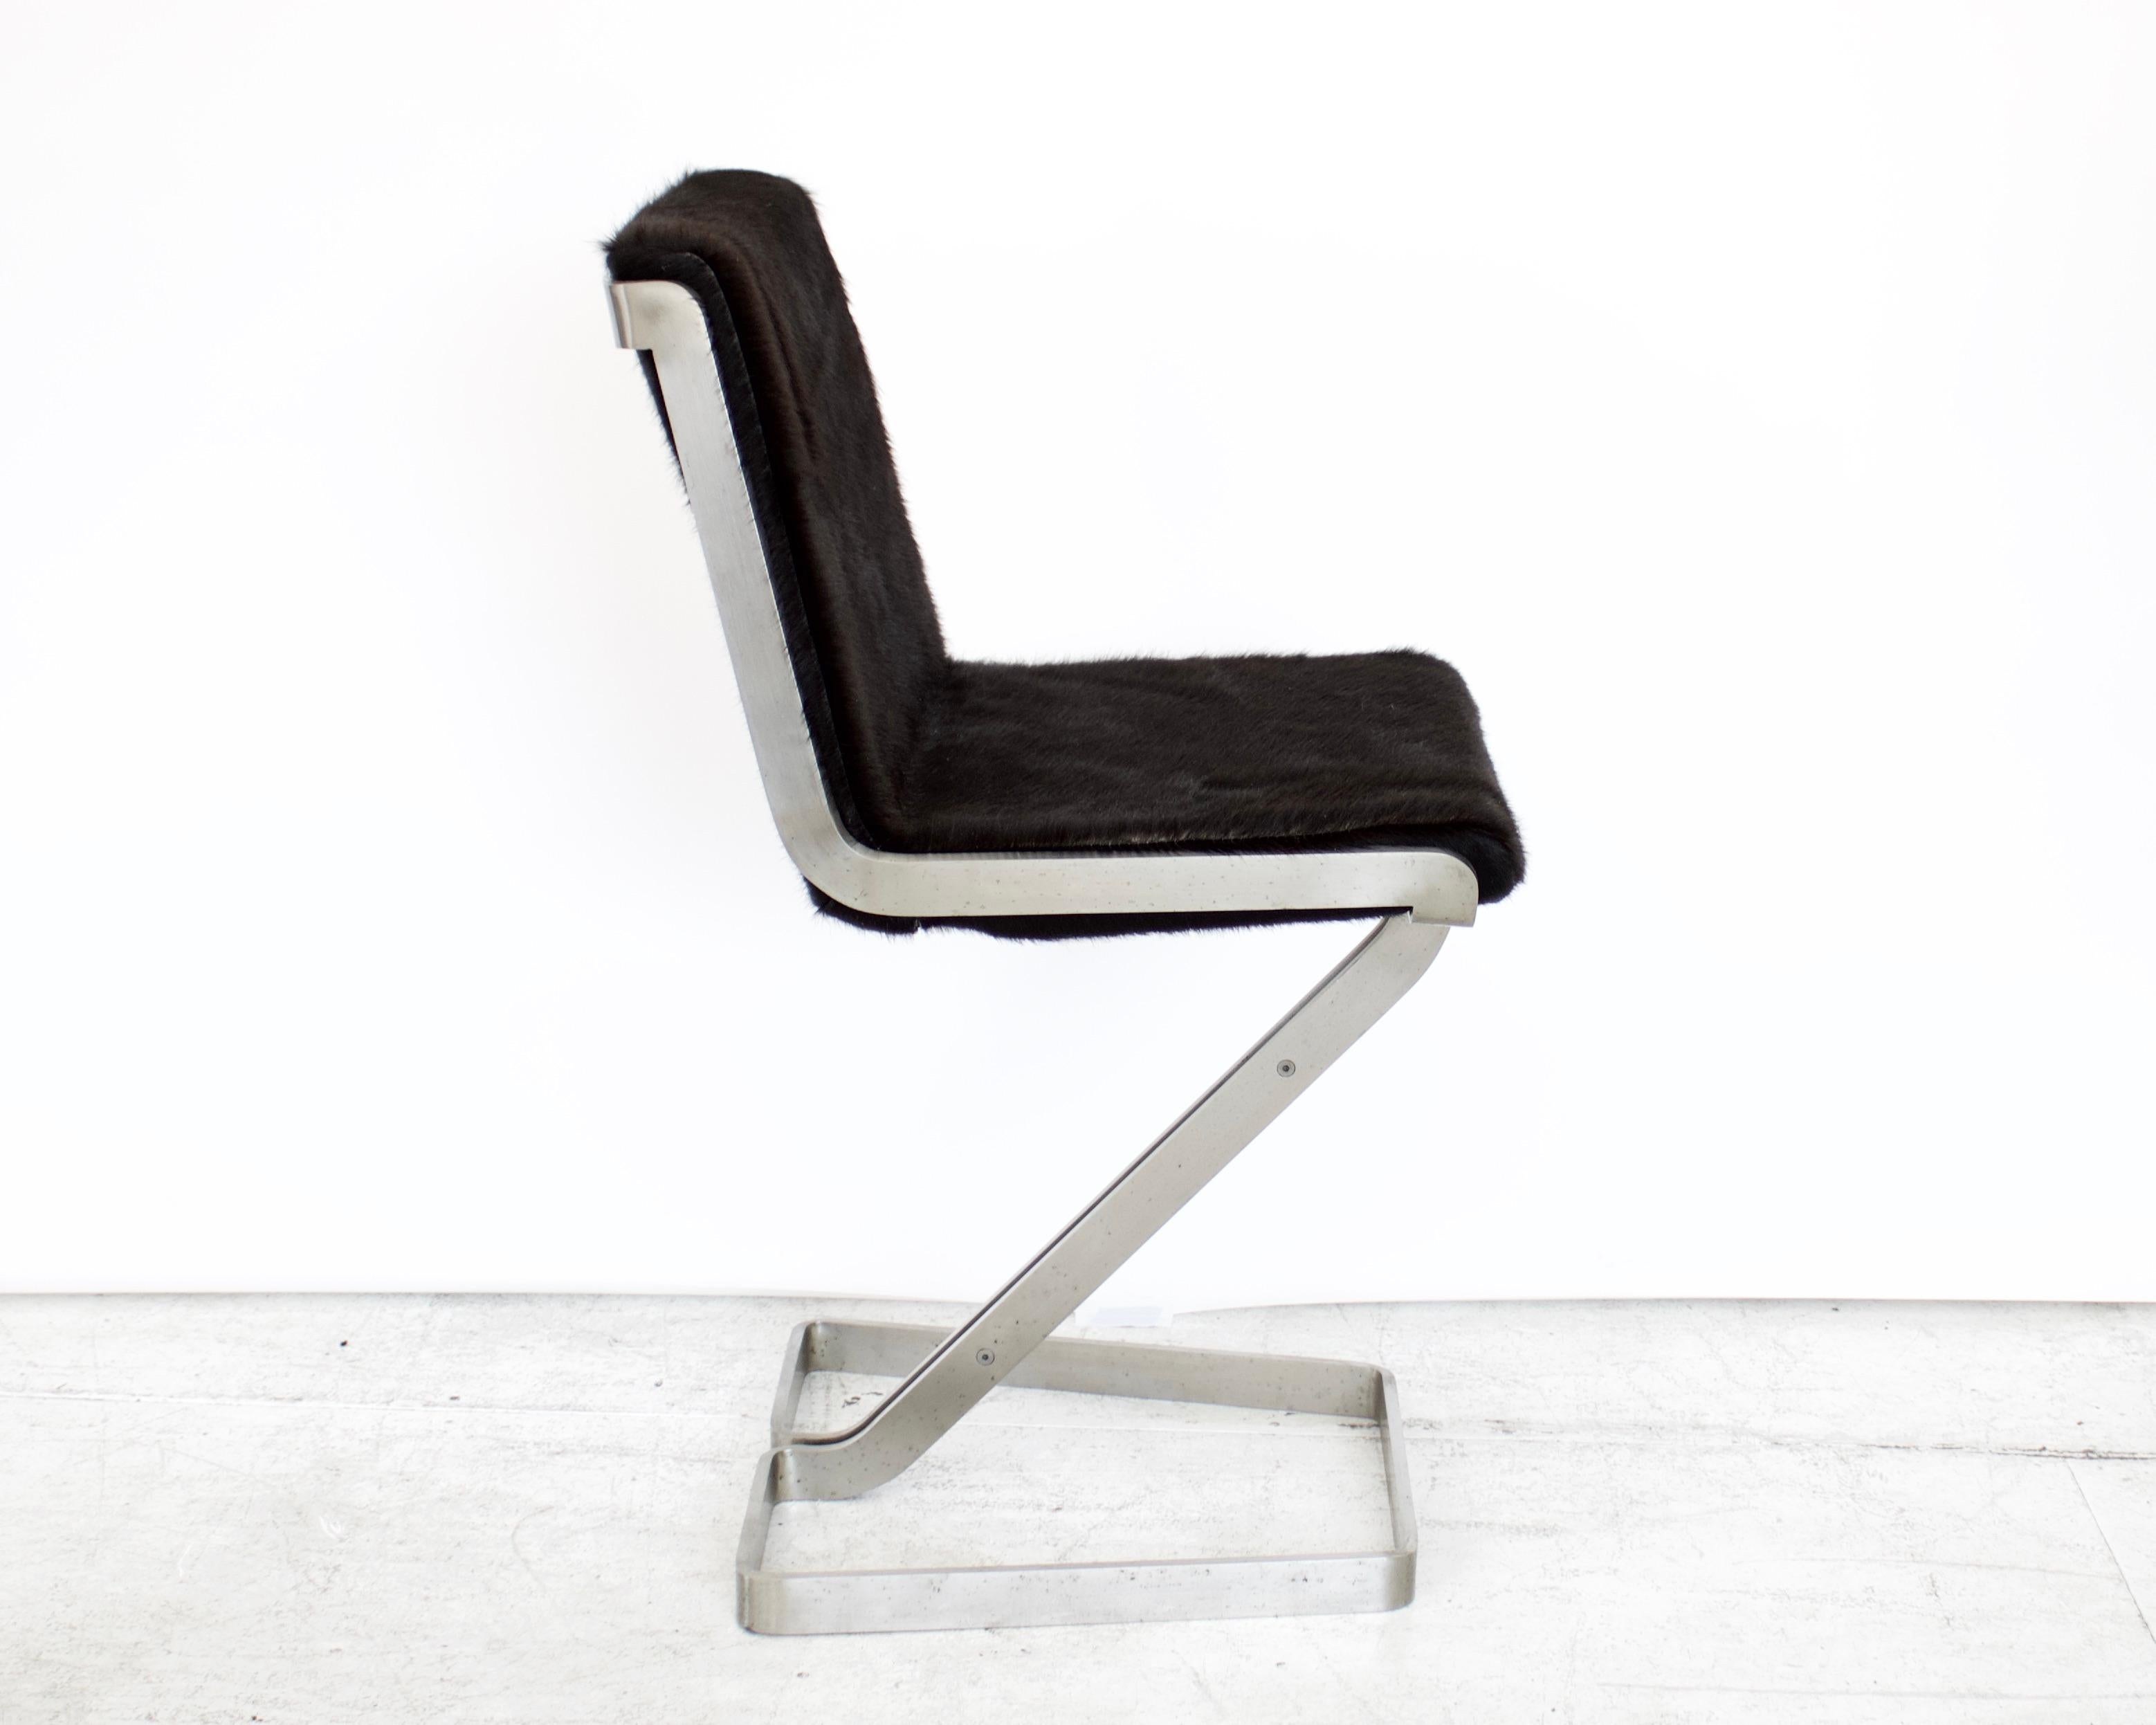 Stainless steel desk chair by forma Nova and newly reupholstered in black hair on hide cowhide. The stainless steel is polished with a matte surface with no pitting or surface issues. The frame of the chair if very heavy and substantial.
The chair